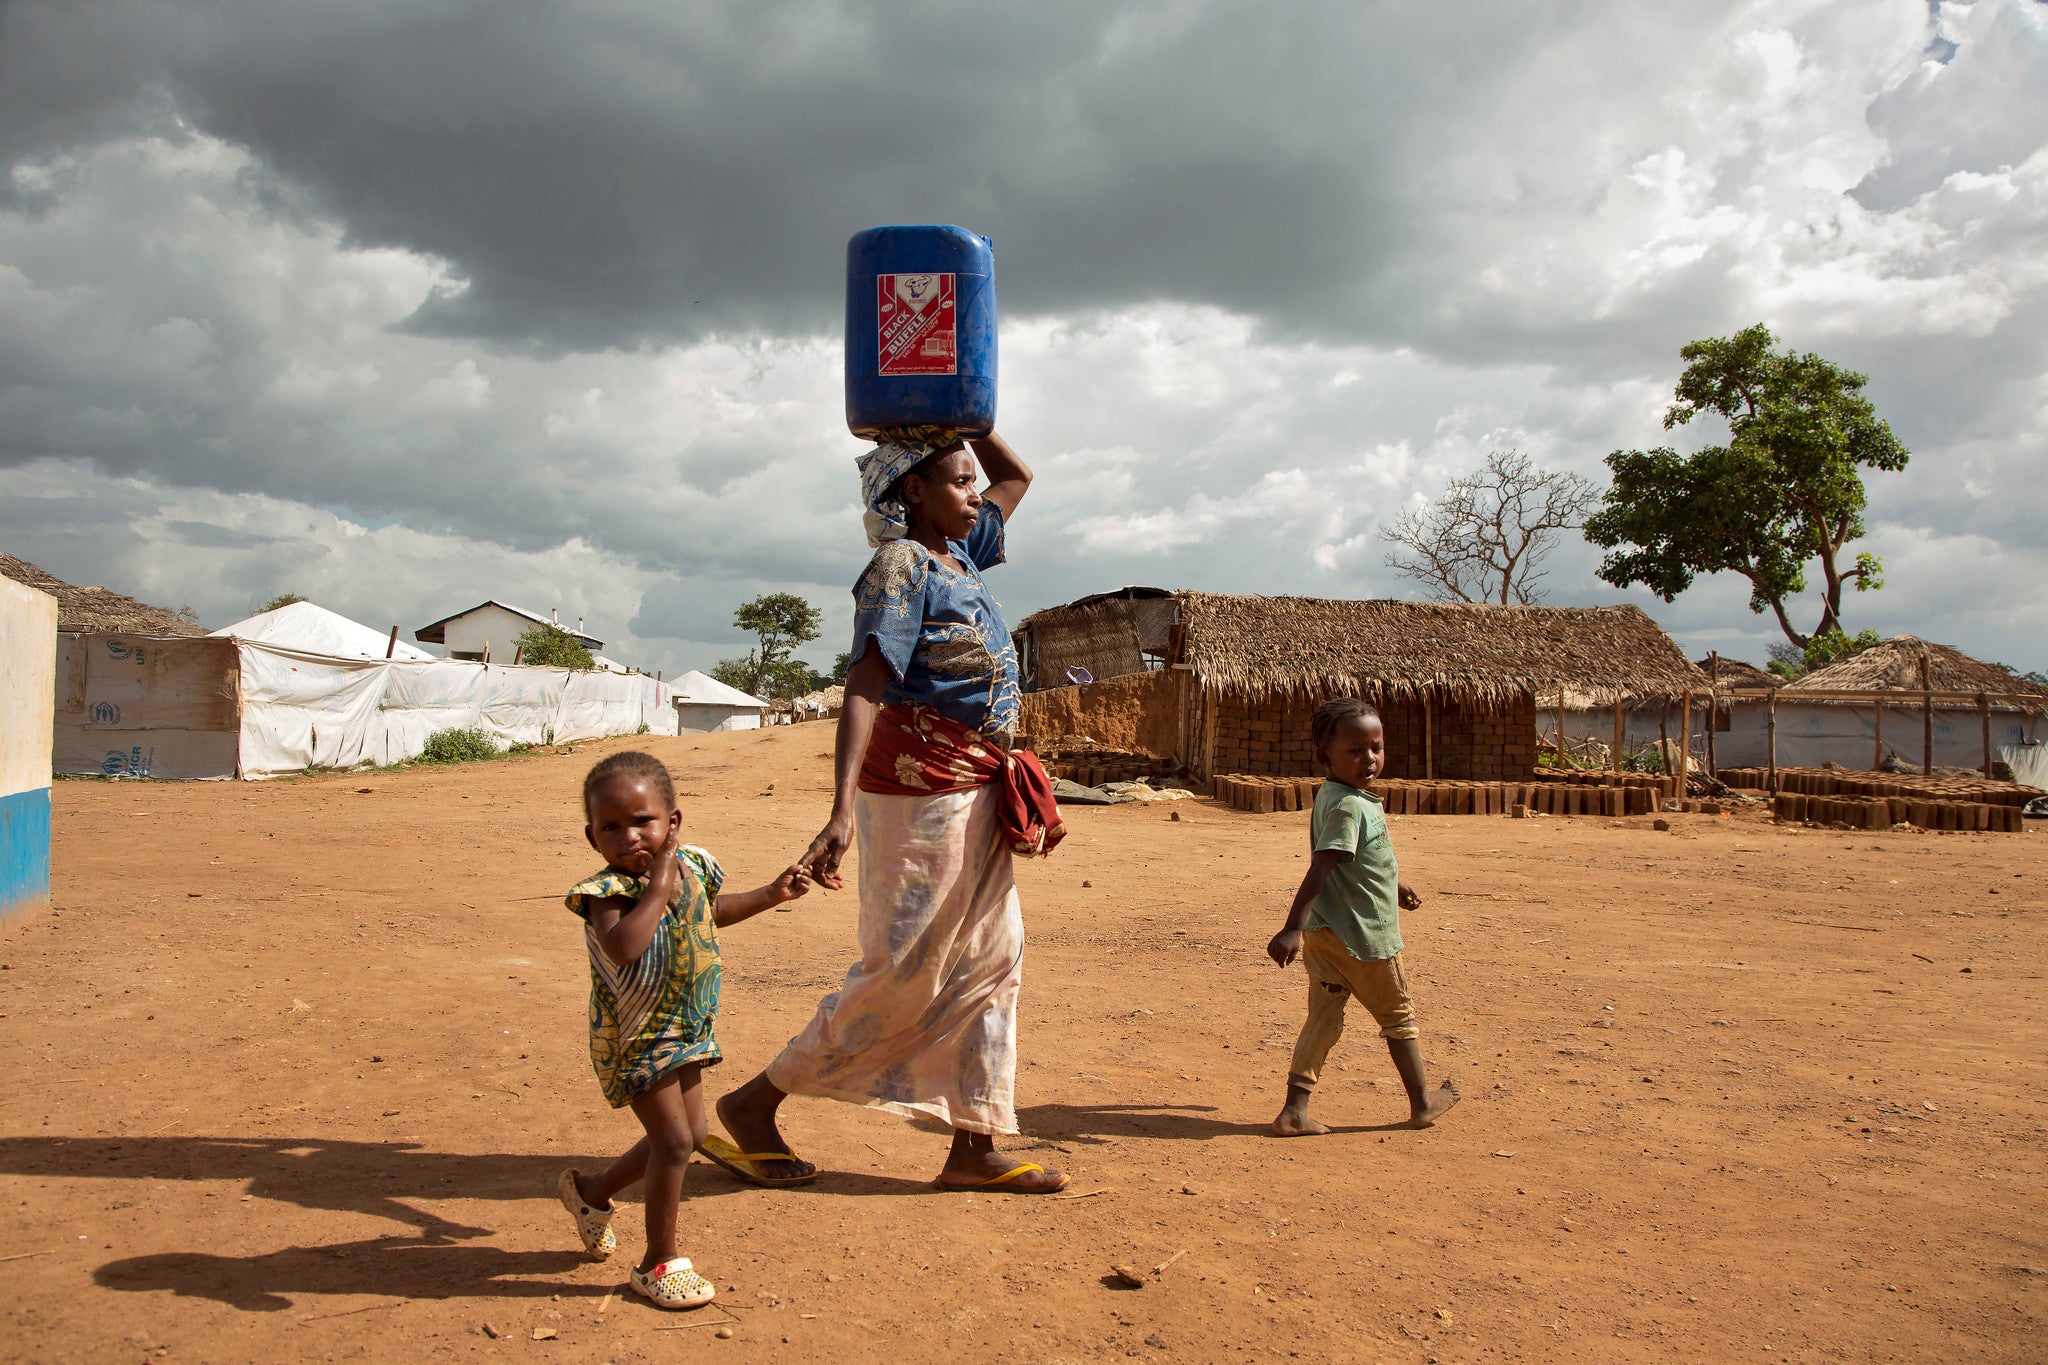 A woman carries a large jug of water through Gado refugee camp